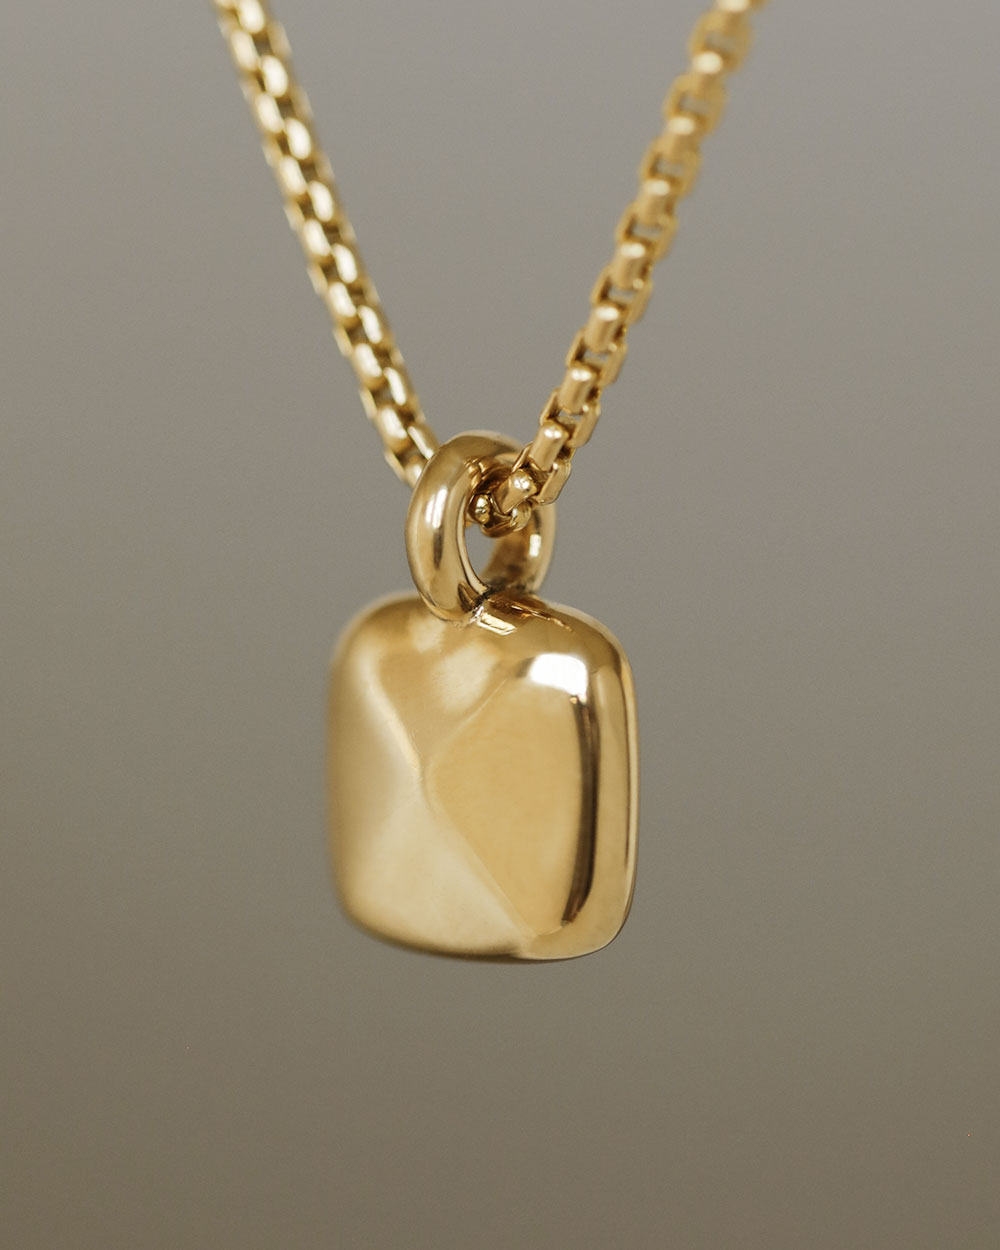 Dominus Pendant by George Rings - 18K Yellow Gold Circle Pendant Dominus Pendant and 24 Box Chain